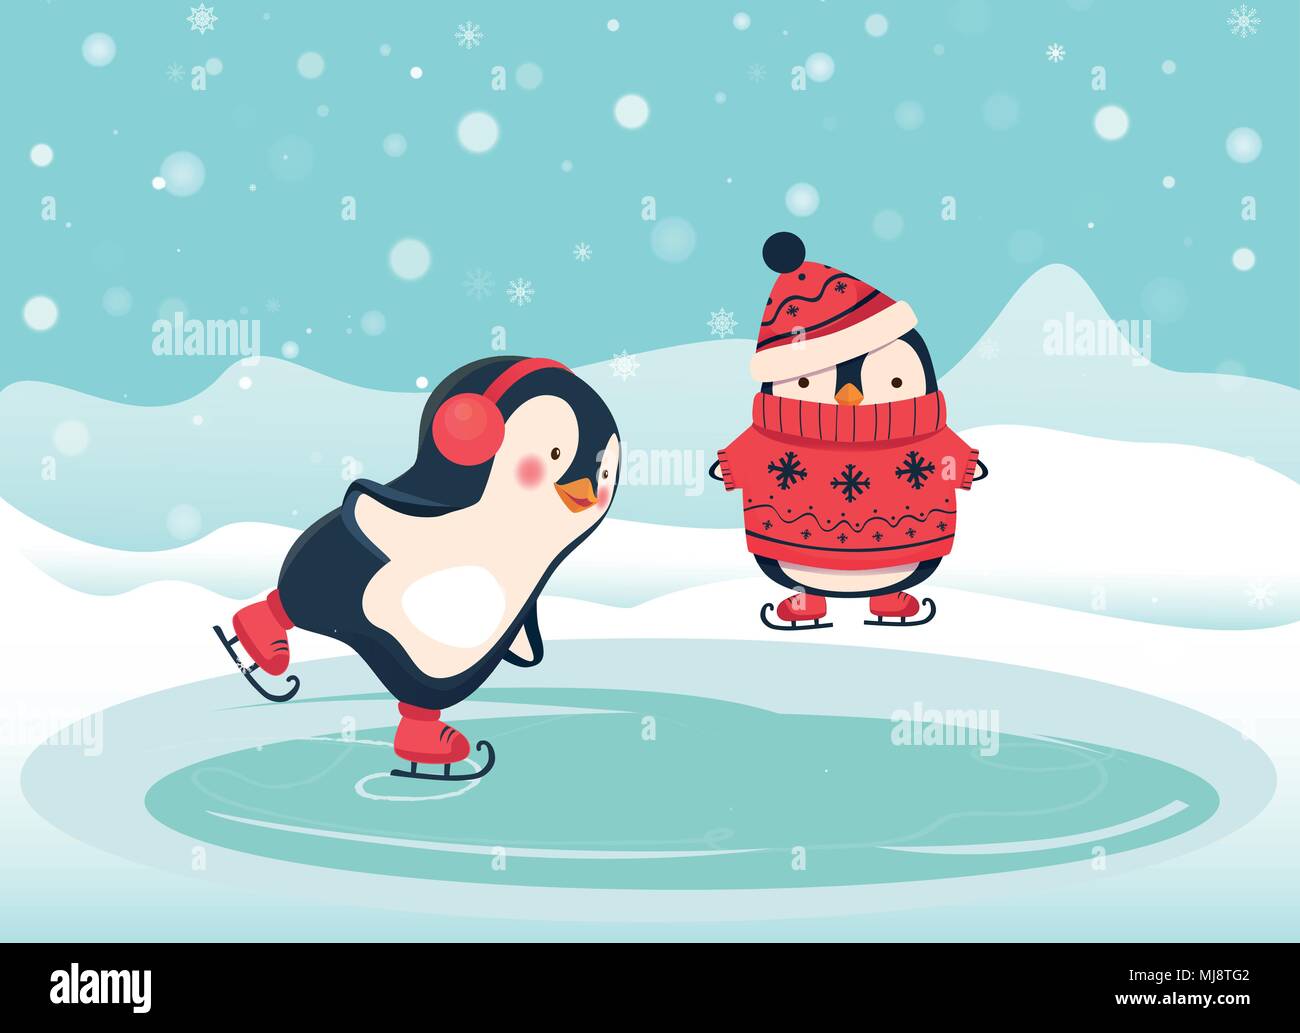 2,882 Penguin Sweater Images, Stock Photos, 3D objects, & Vectors